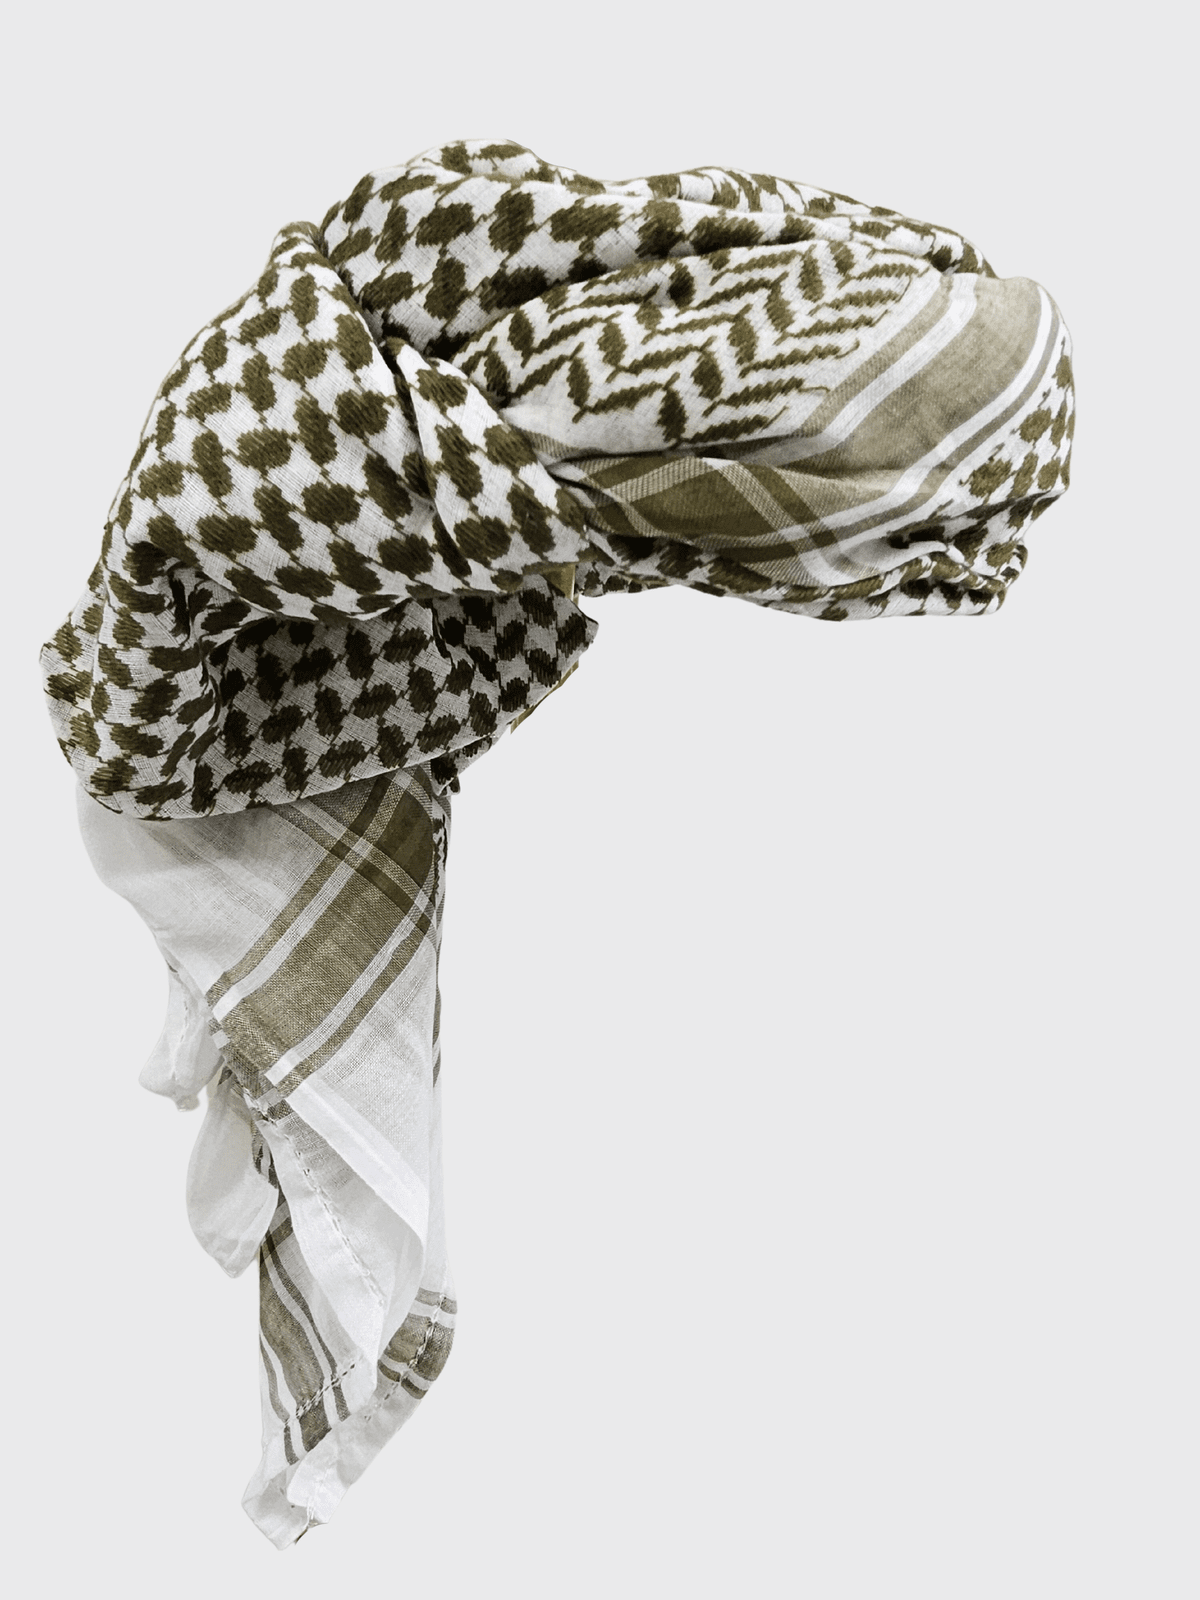 Mens Ready Made Olive Green & White Arab Hat Shemagh